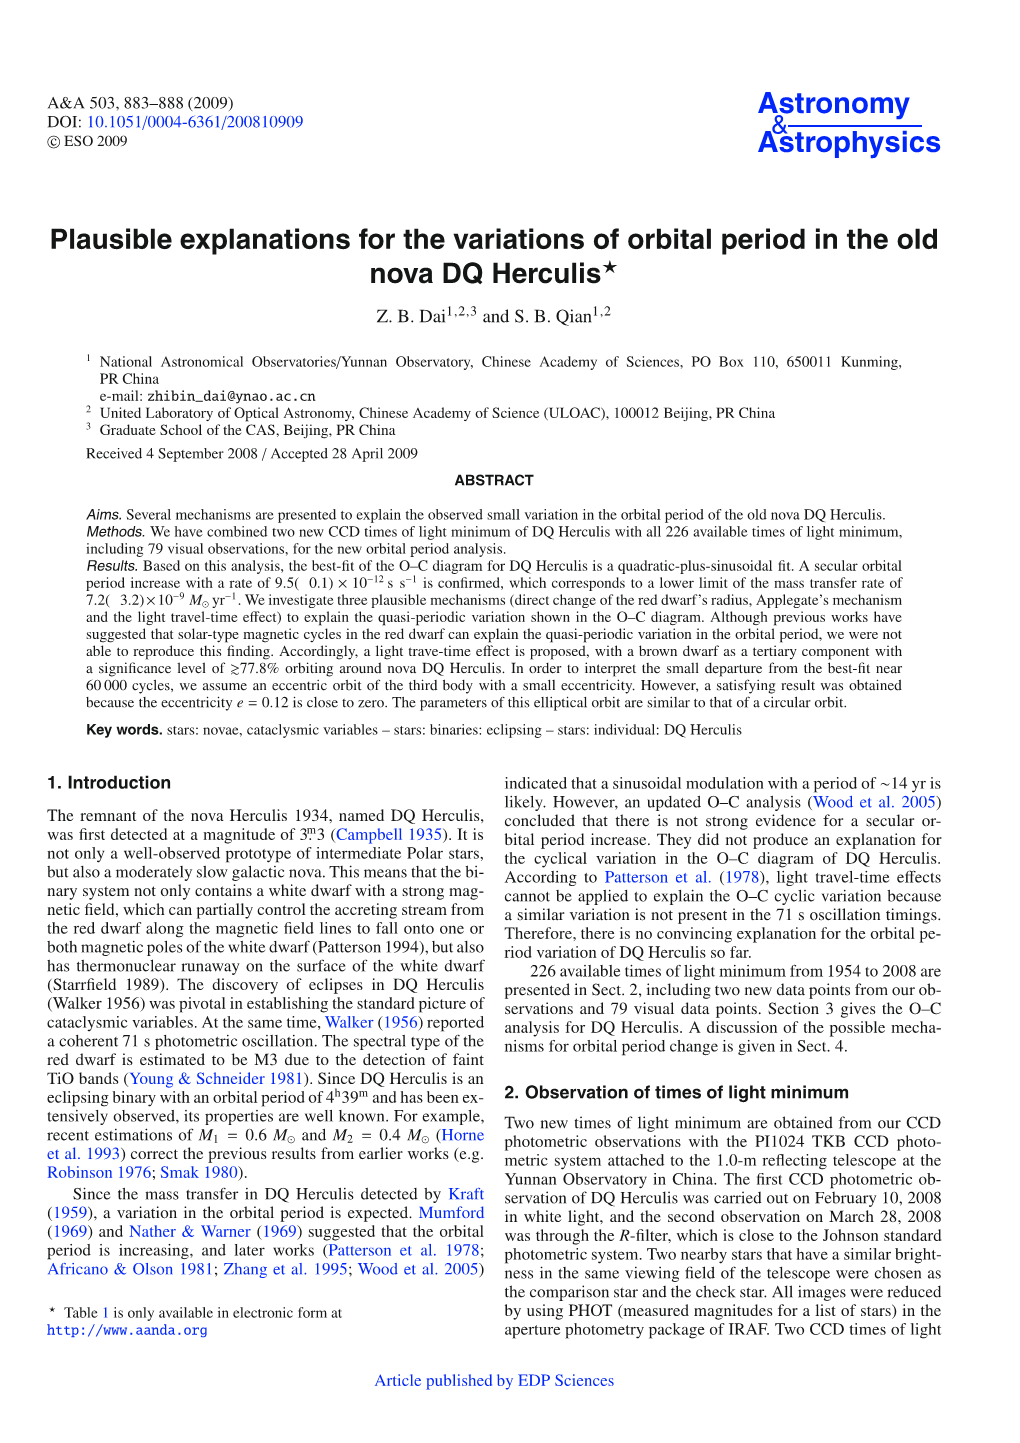 Plausible Explanations for the Variations of Orbital Period in the Old Nova DQ Herculis